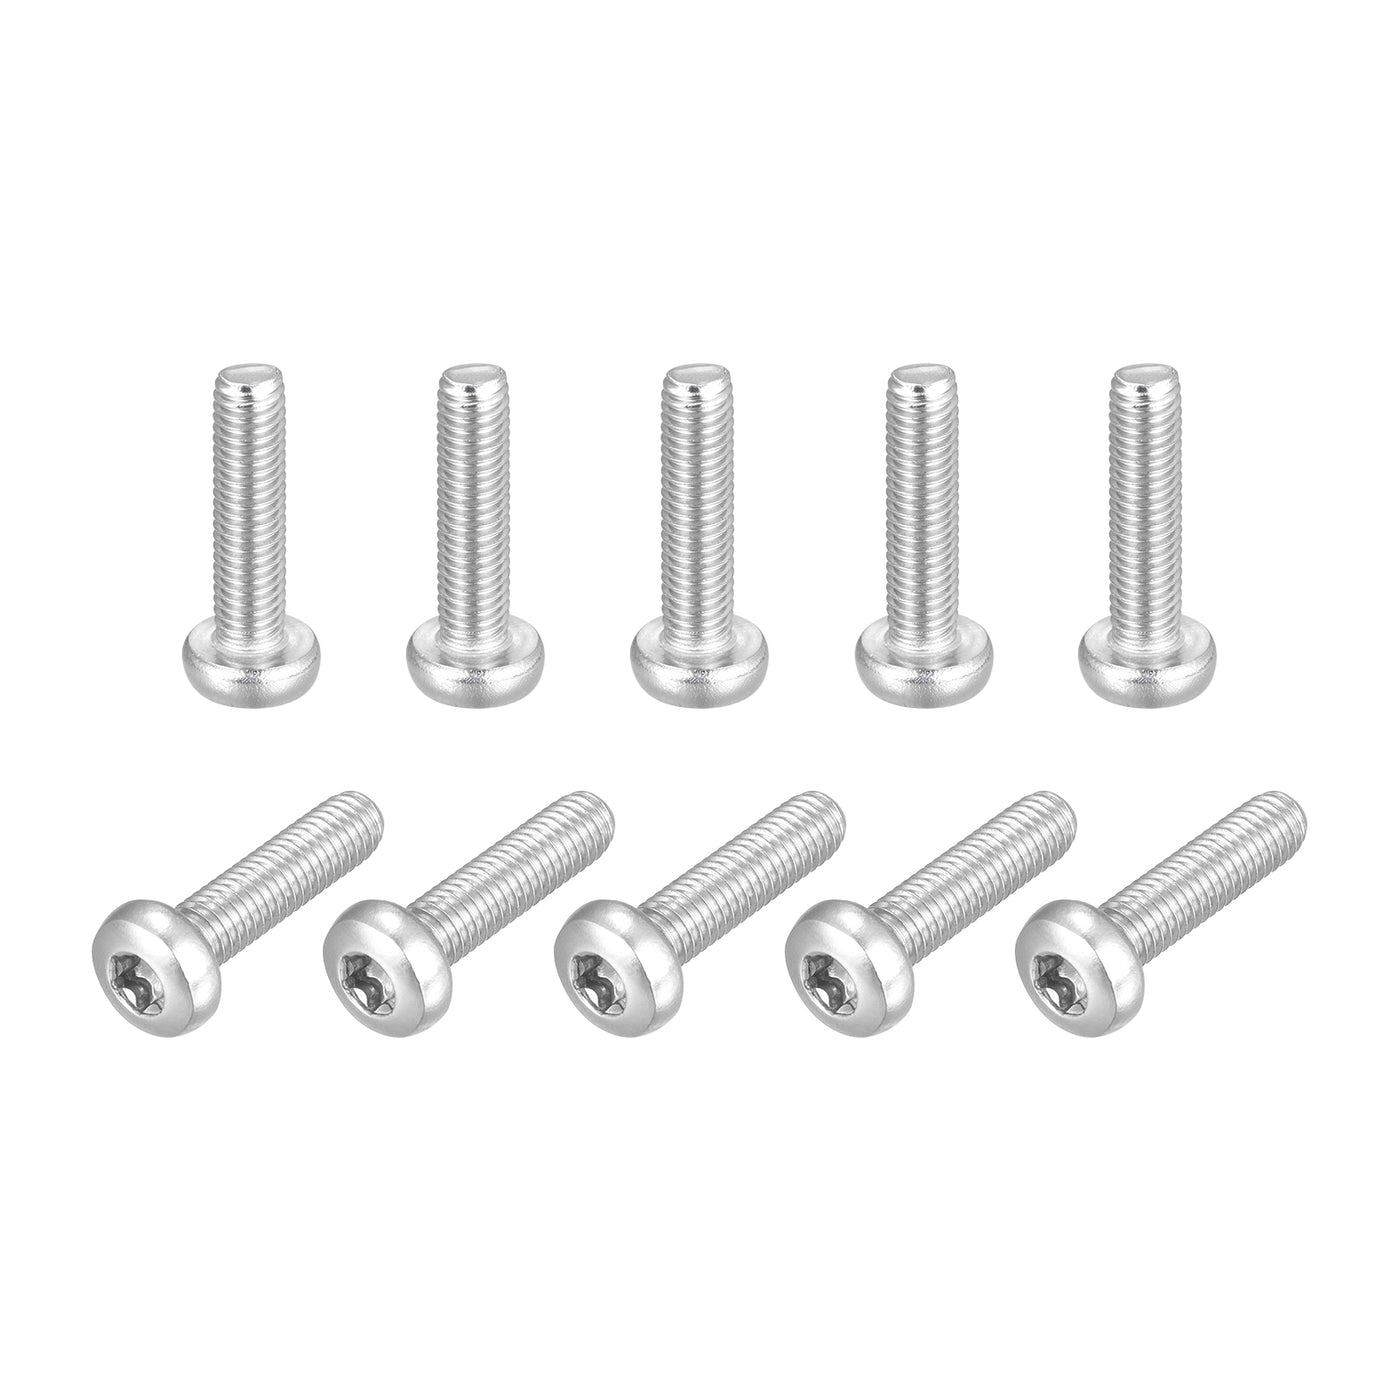 uxcell Uxcell M5x20mm Torx Security Machine Screws, 10pcs 316 Stainless Steel Pan Head Screw